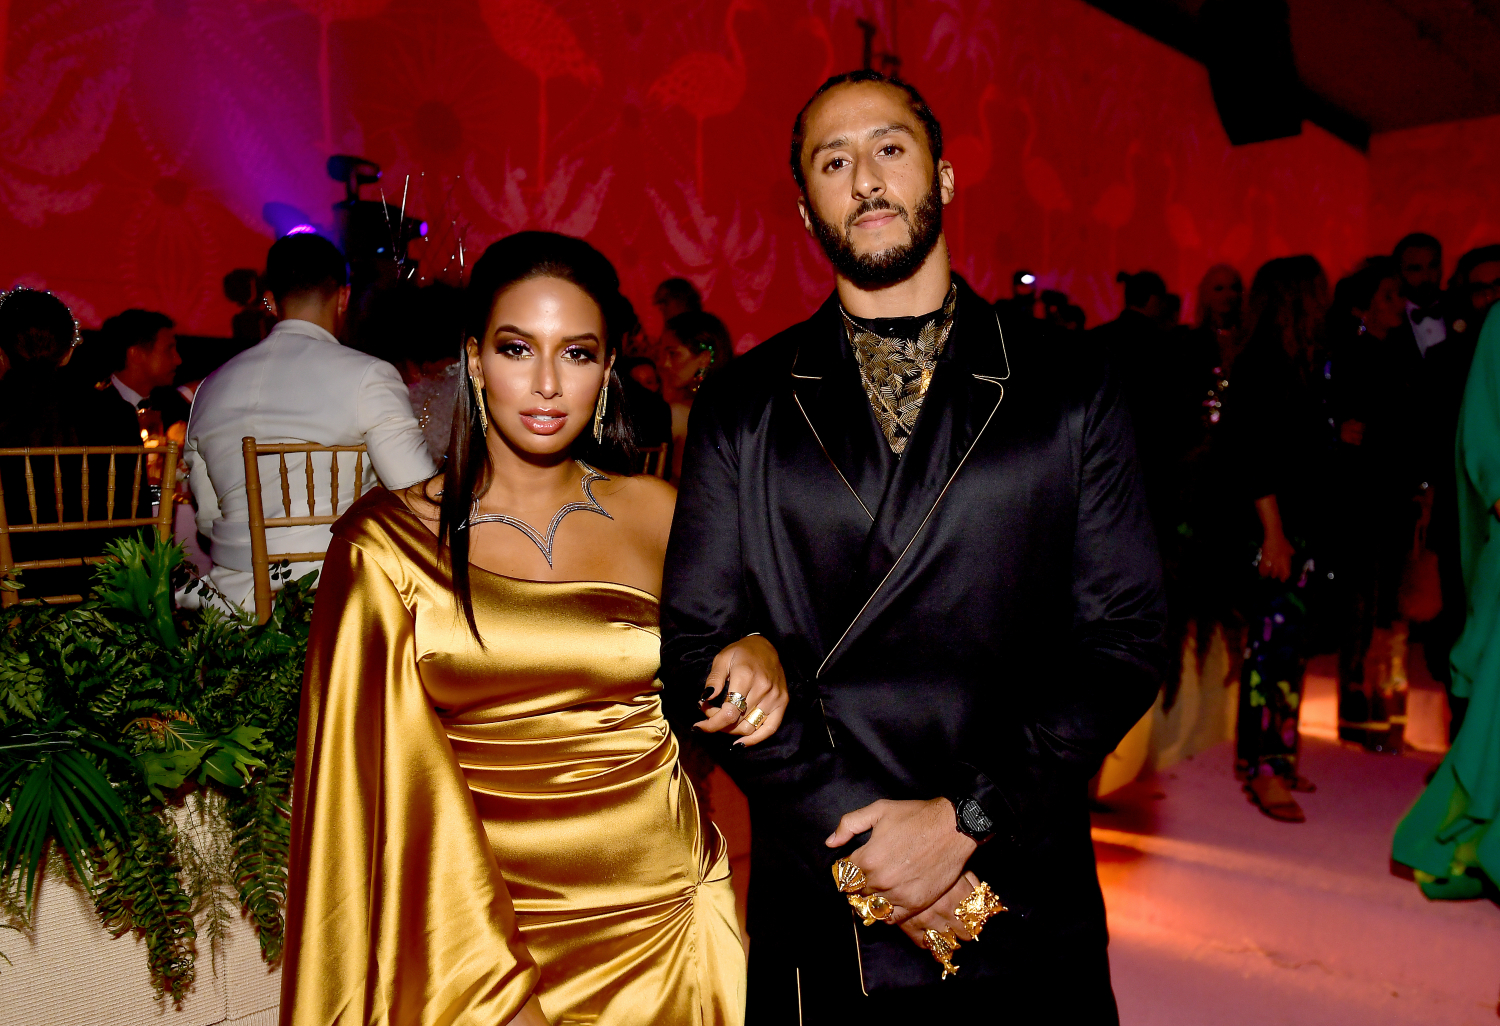 Colin Kaepernick worked out in front of NFL teams in 2019. Since he is still not in the NFL, his girlfriend Nessa sent out a strong message.